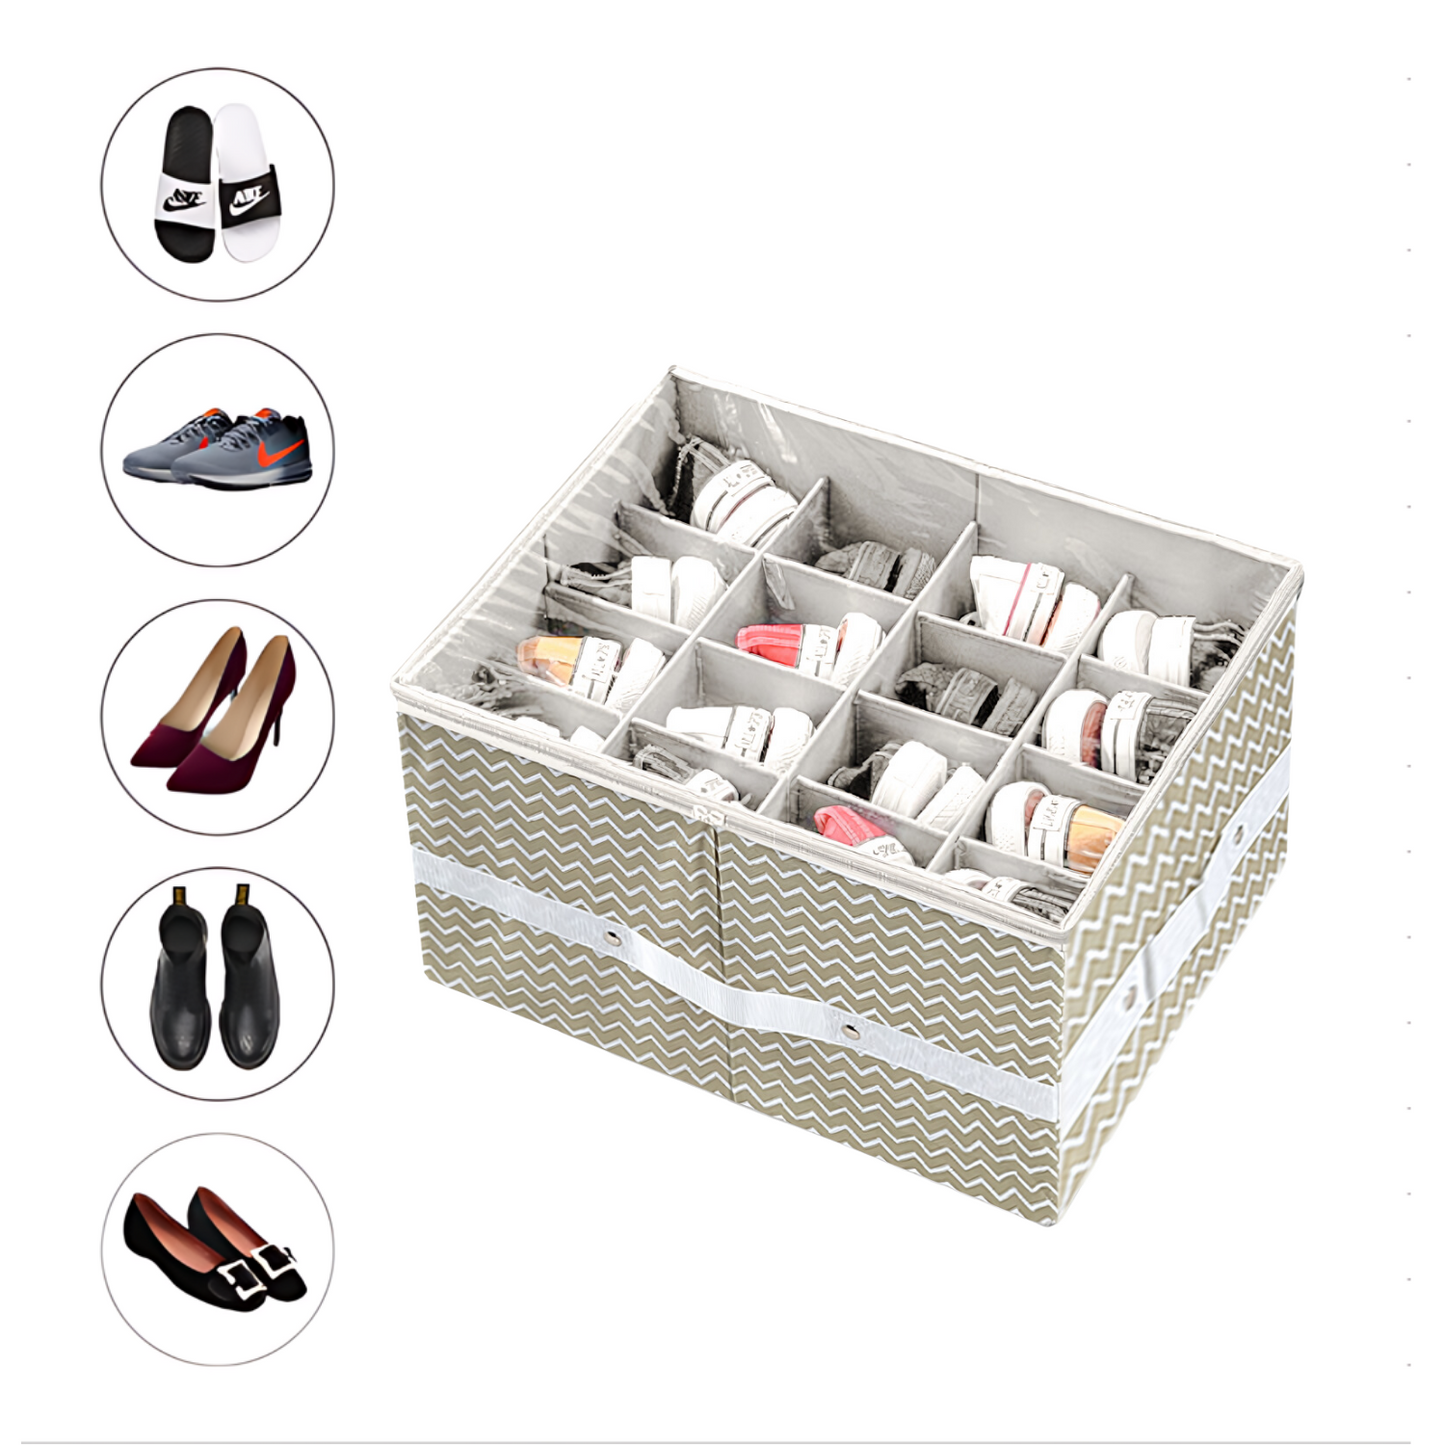 Qoolish 16-Pair Shoe Storage Organizer - Clear, Foldable, Space-Saving Shoe Cubby with Bottom Support